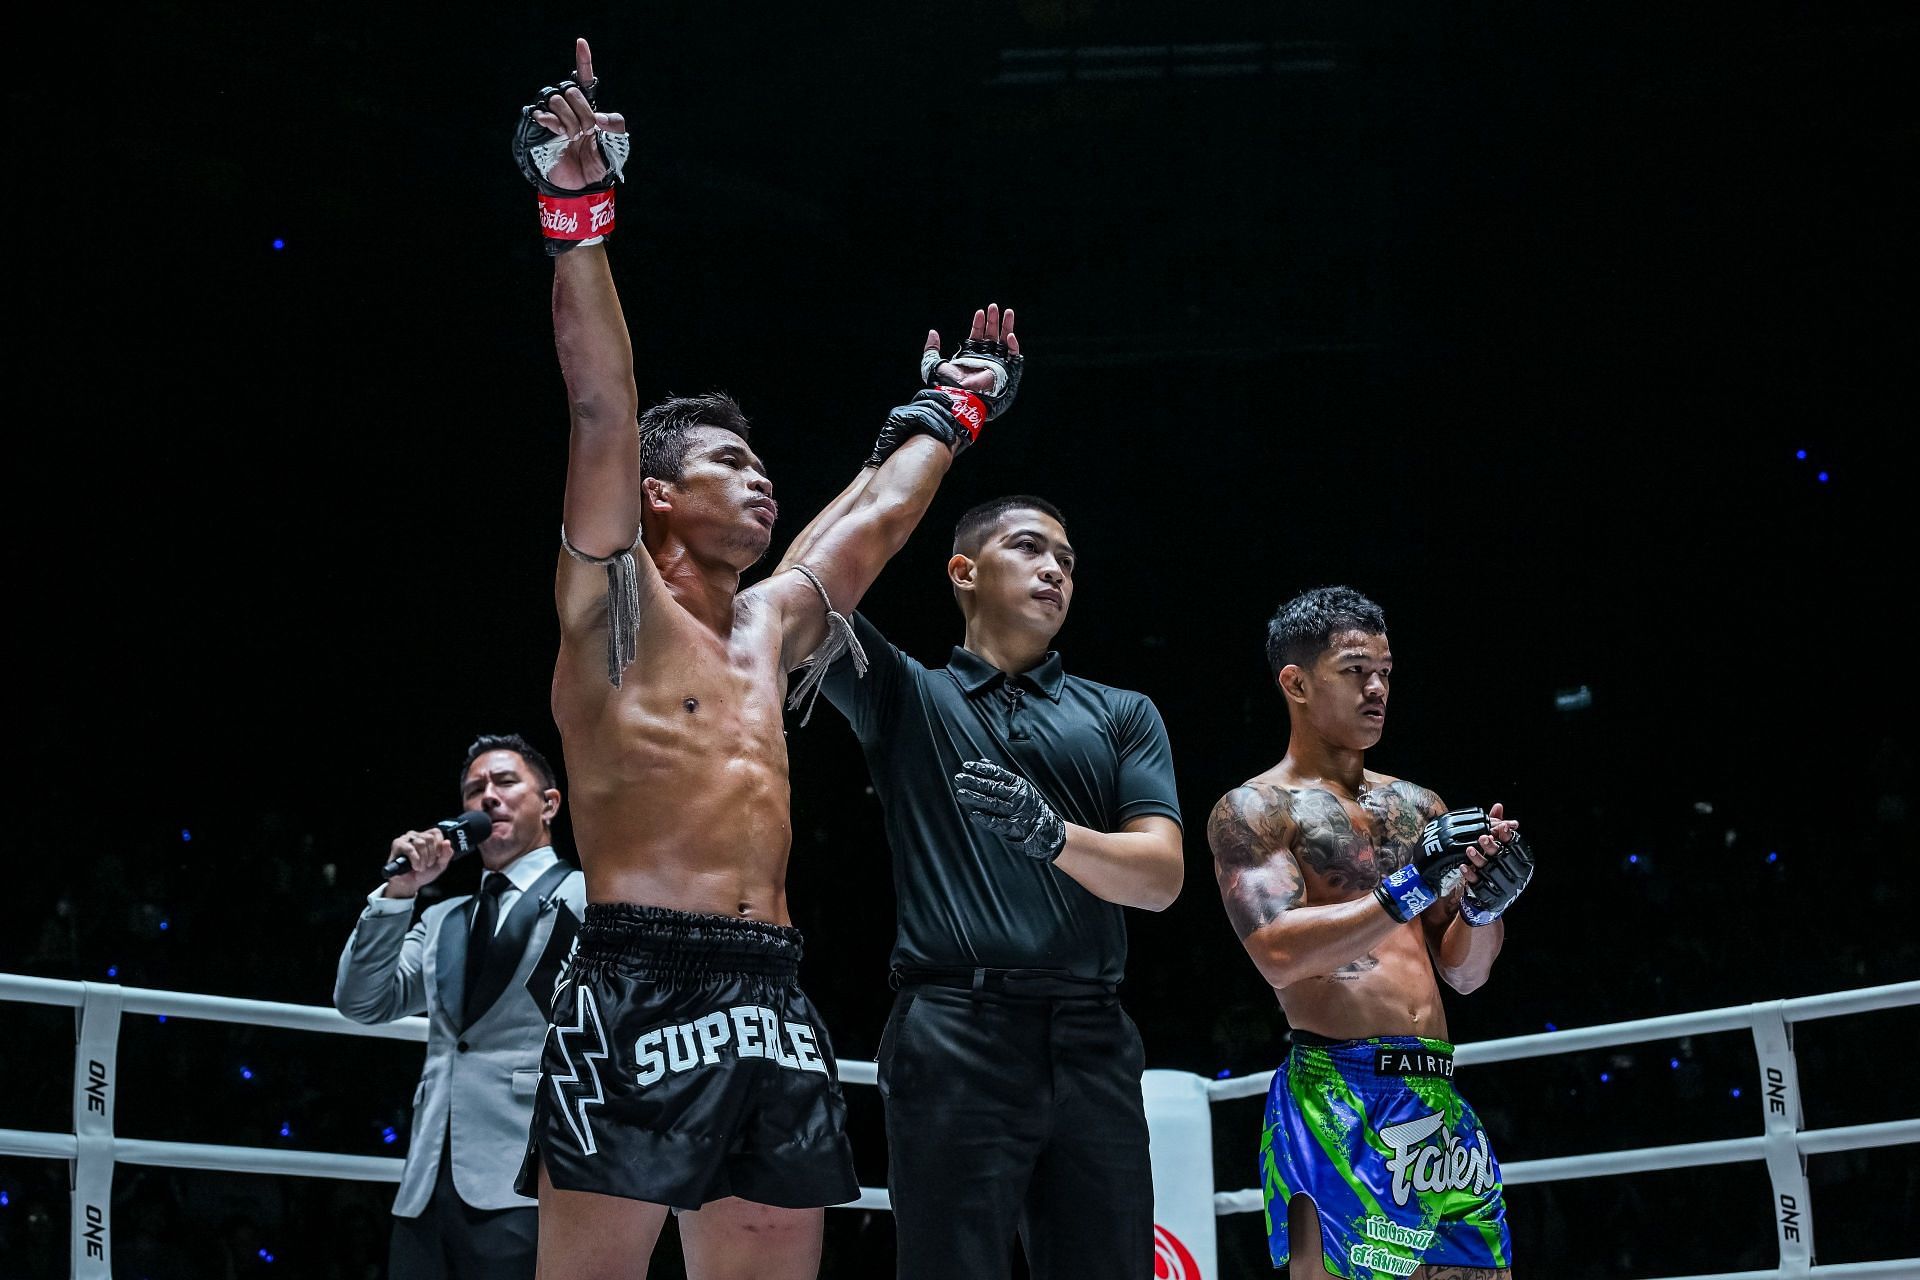 Superlek&#039;s arm is raised after his decision win over Kongthoranee.